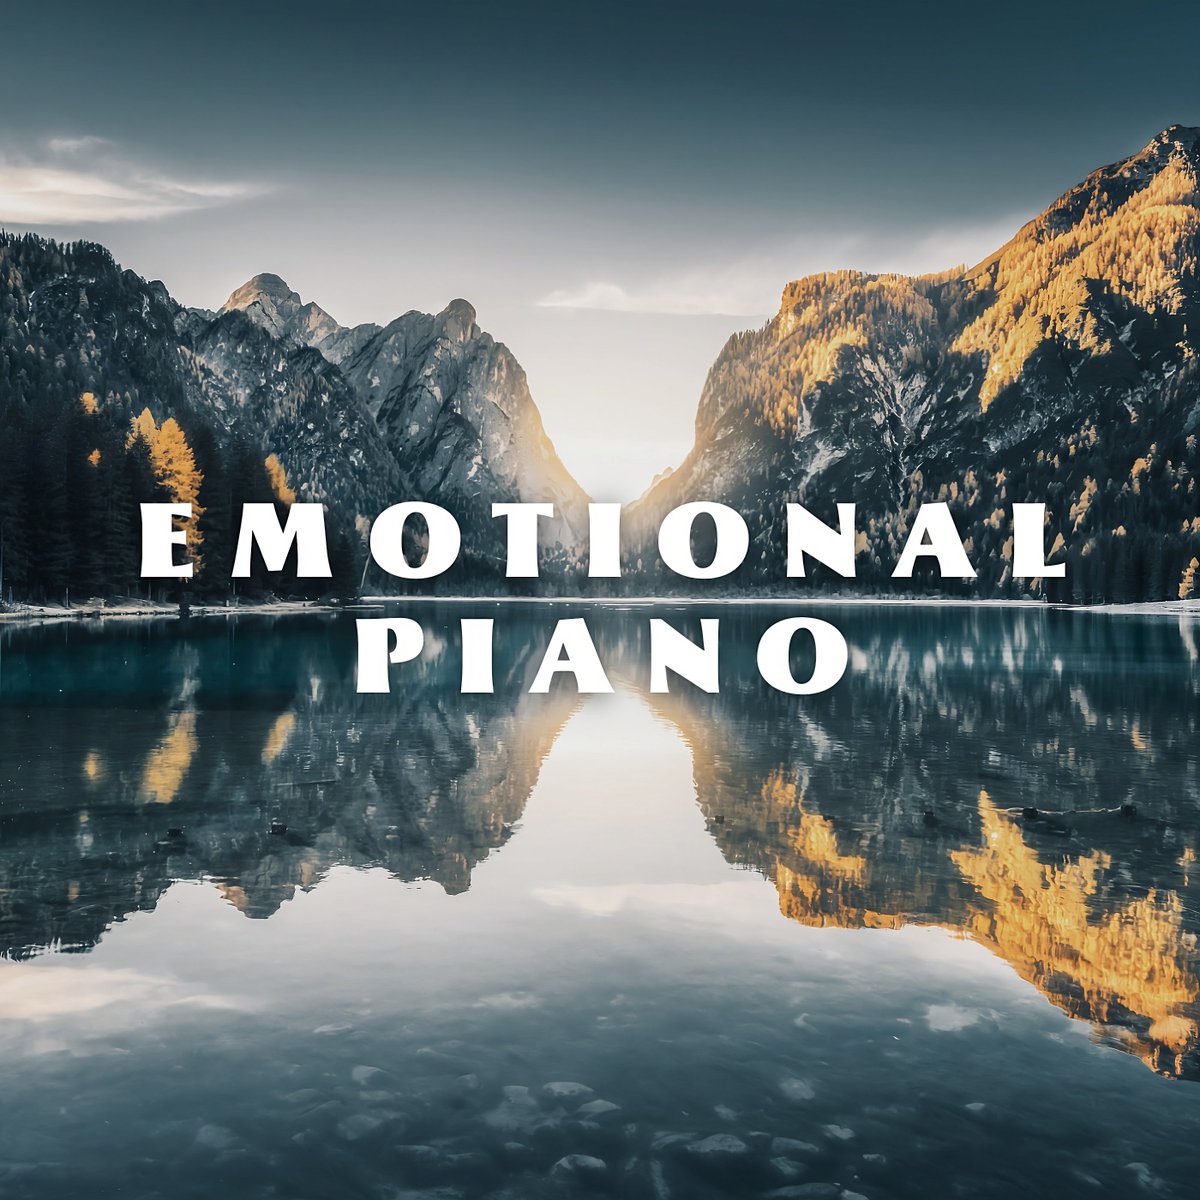 Pre-save my new single 'Emotional Piano' on Spotify: distrokid.com/hyperfollow/va… (powered by @distrokid) #piano #pianomusic #ambient #romantic #sad #guitar #emotional #music #spotify #youtube #composer #soundproducer #Vasyl_Manchuk #newreleaser #NewMusic